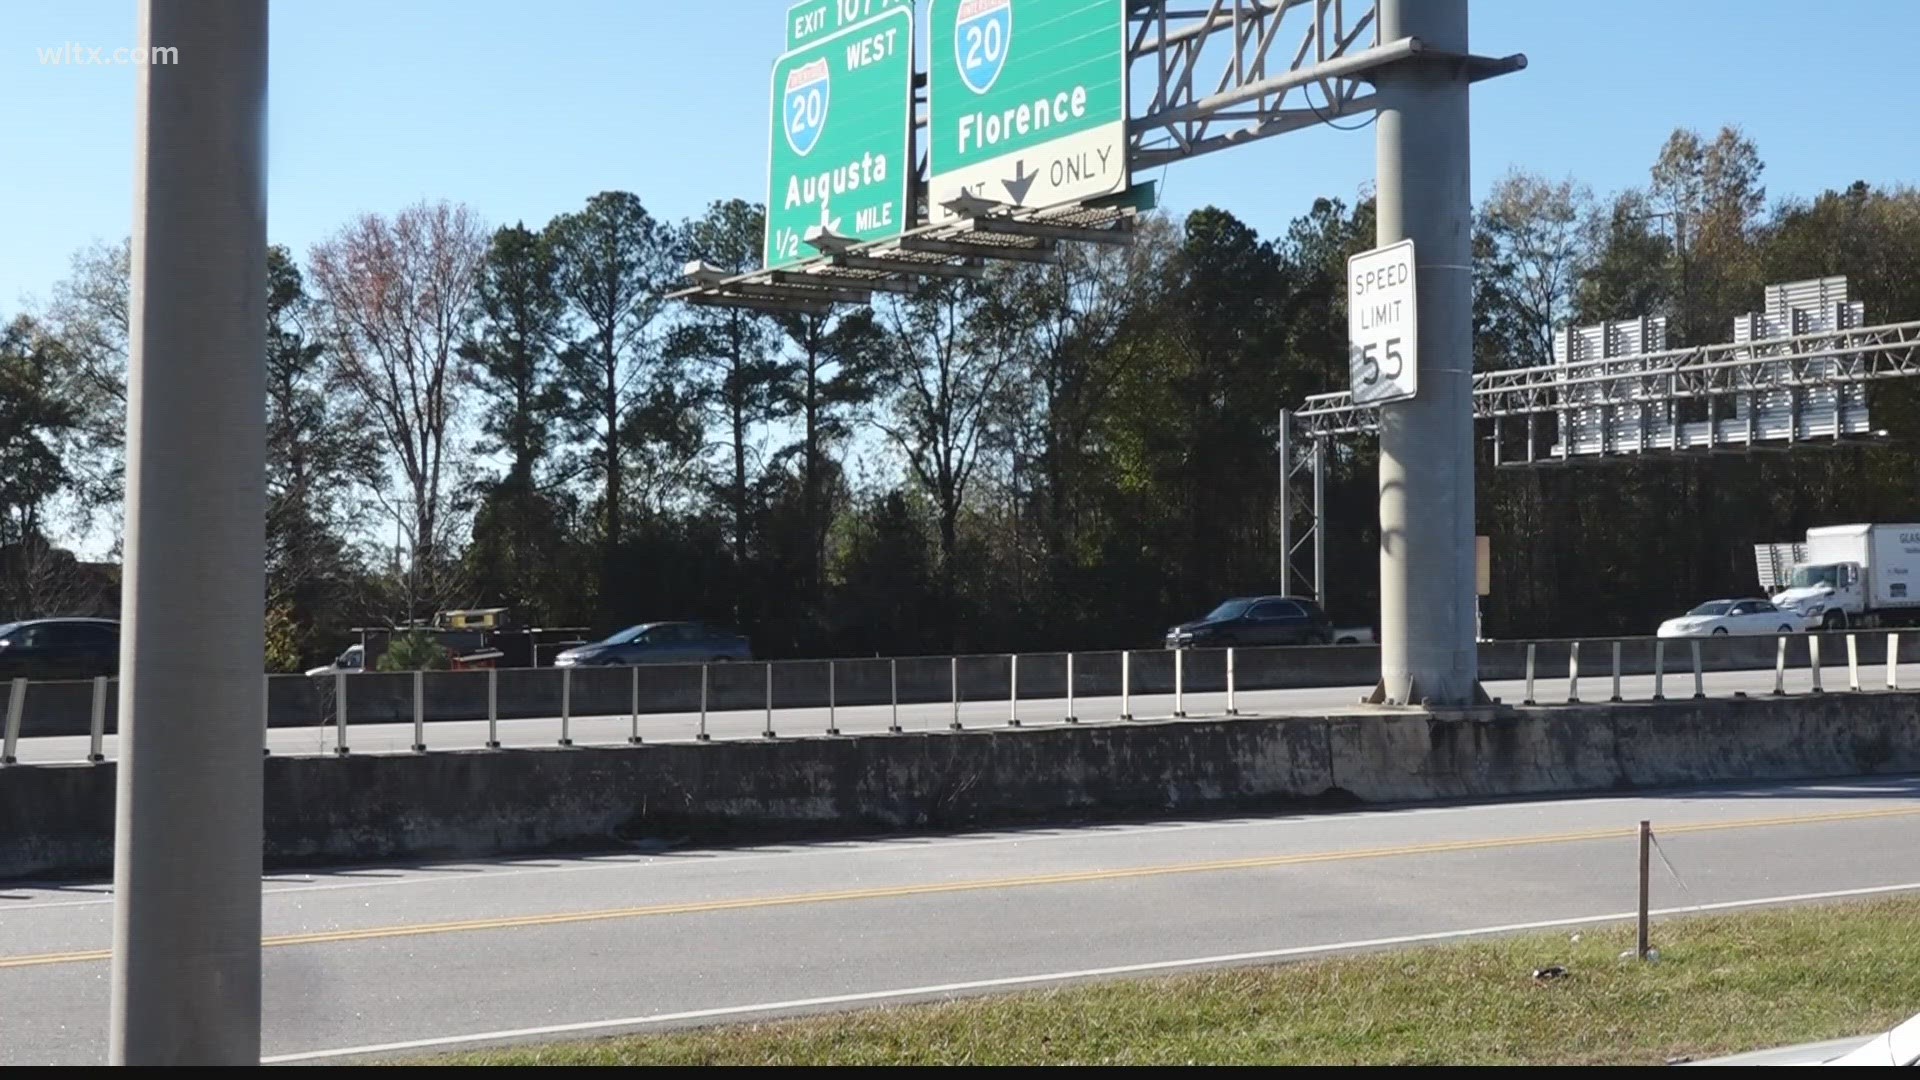 Construction on I-26 is causing some slow times for those traveling this holiday.